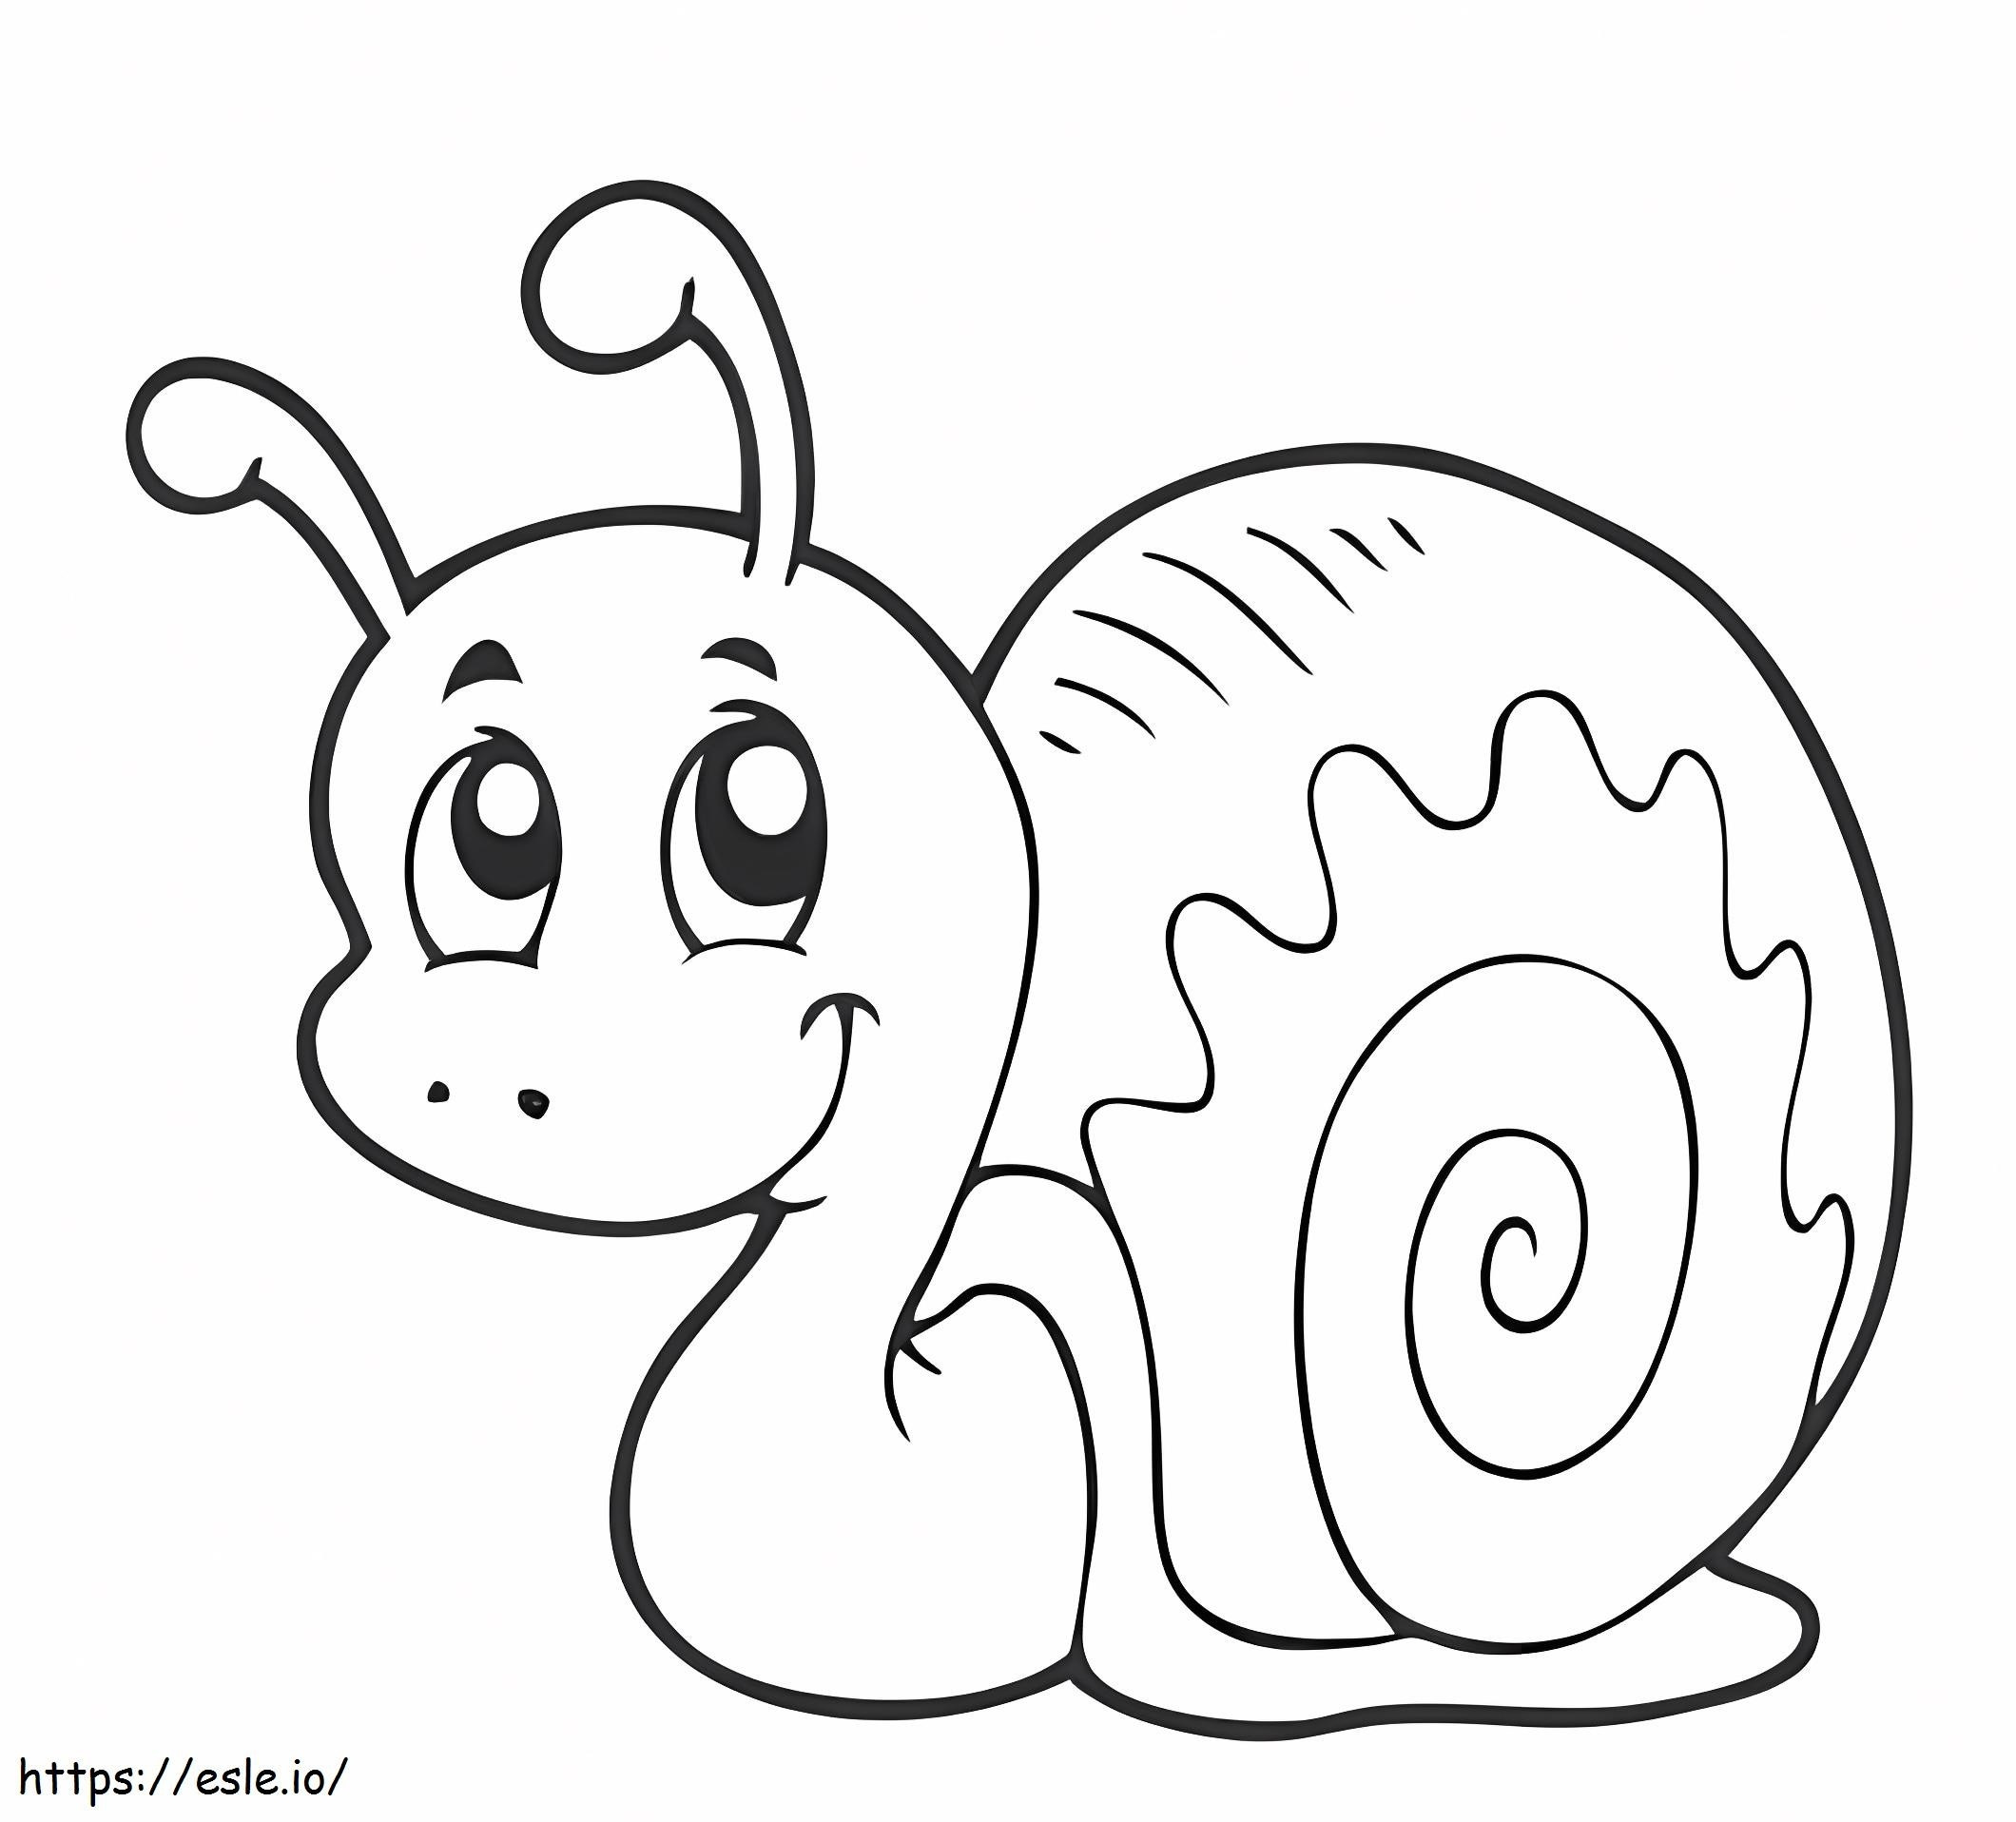 Awesome Snail coloring page